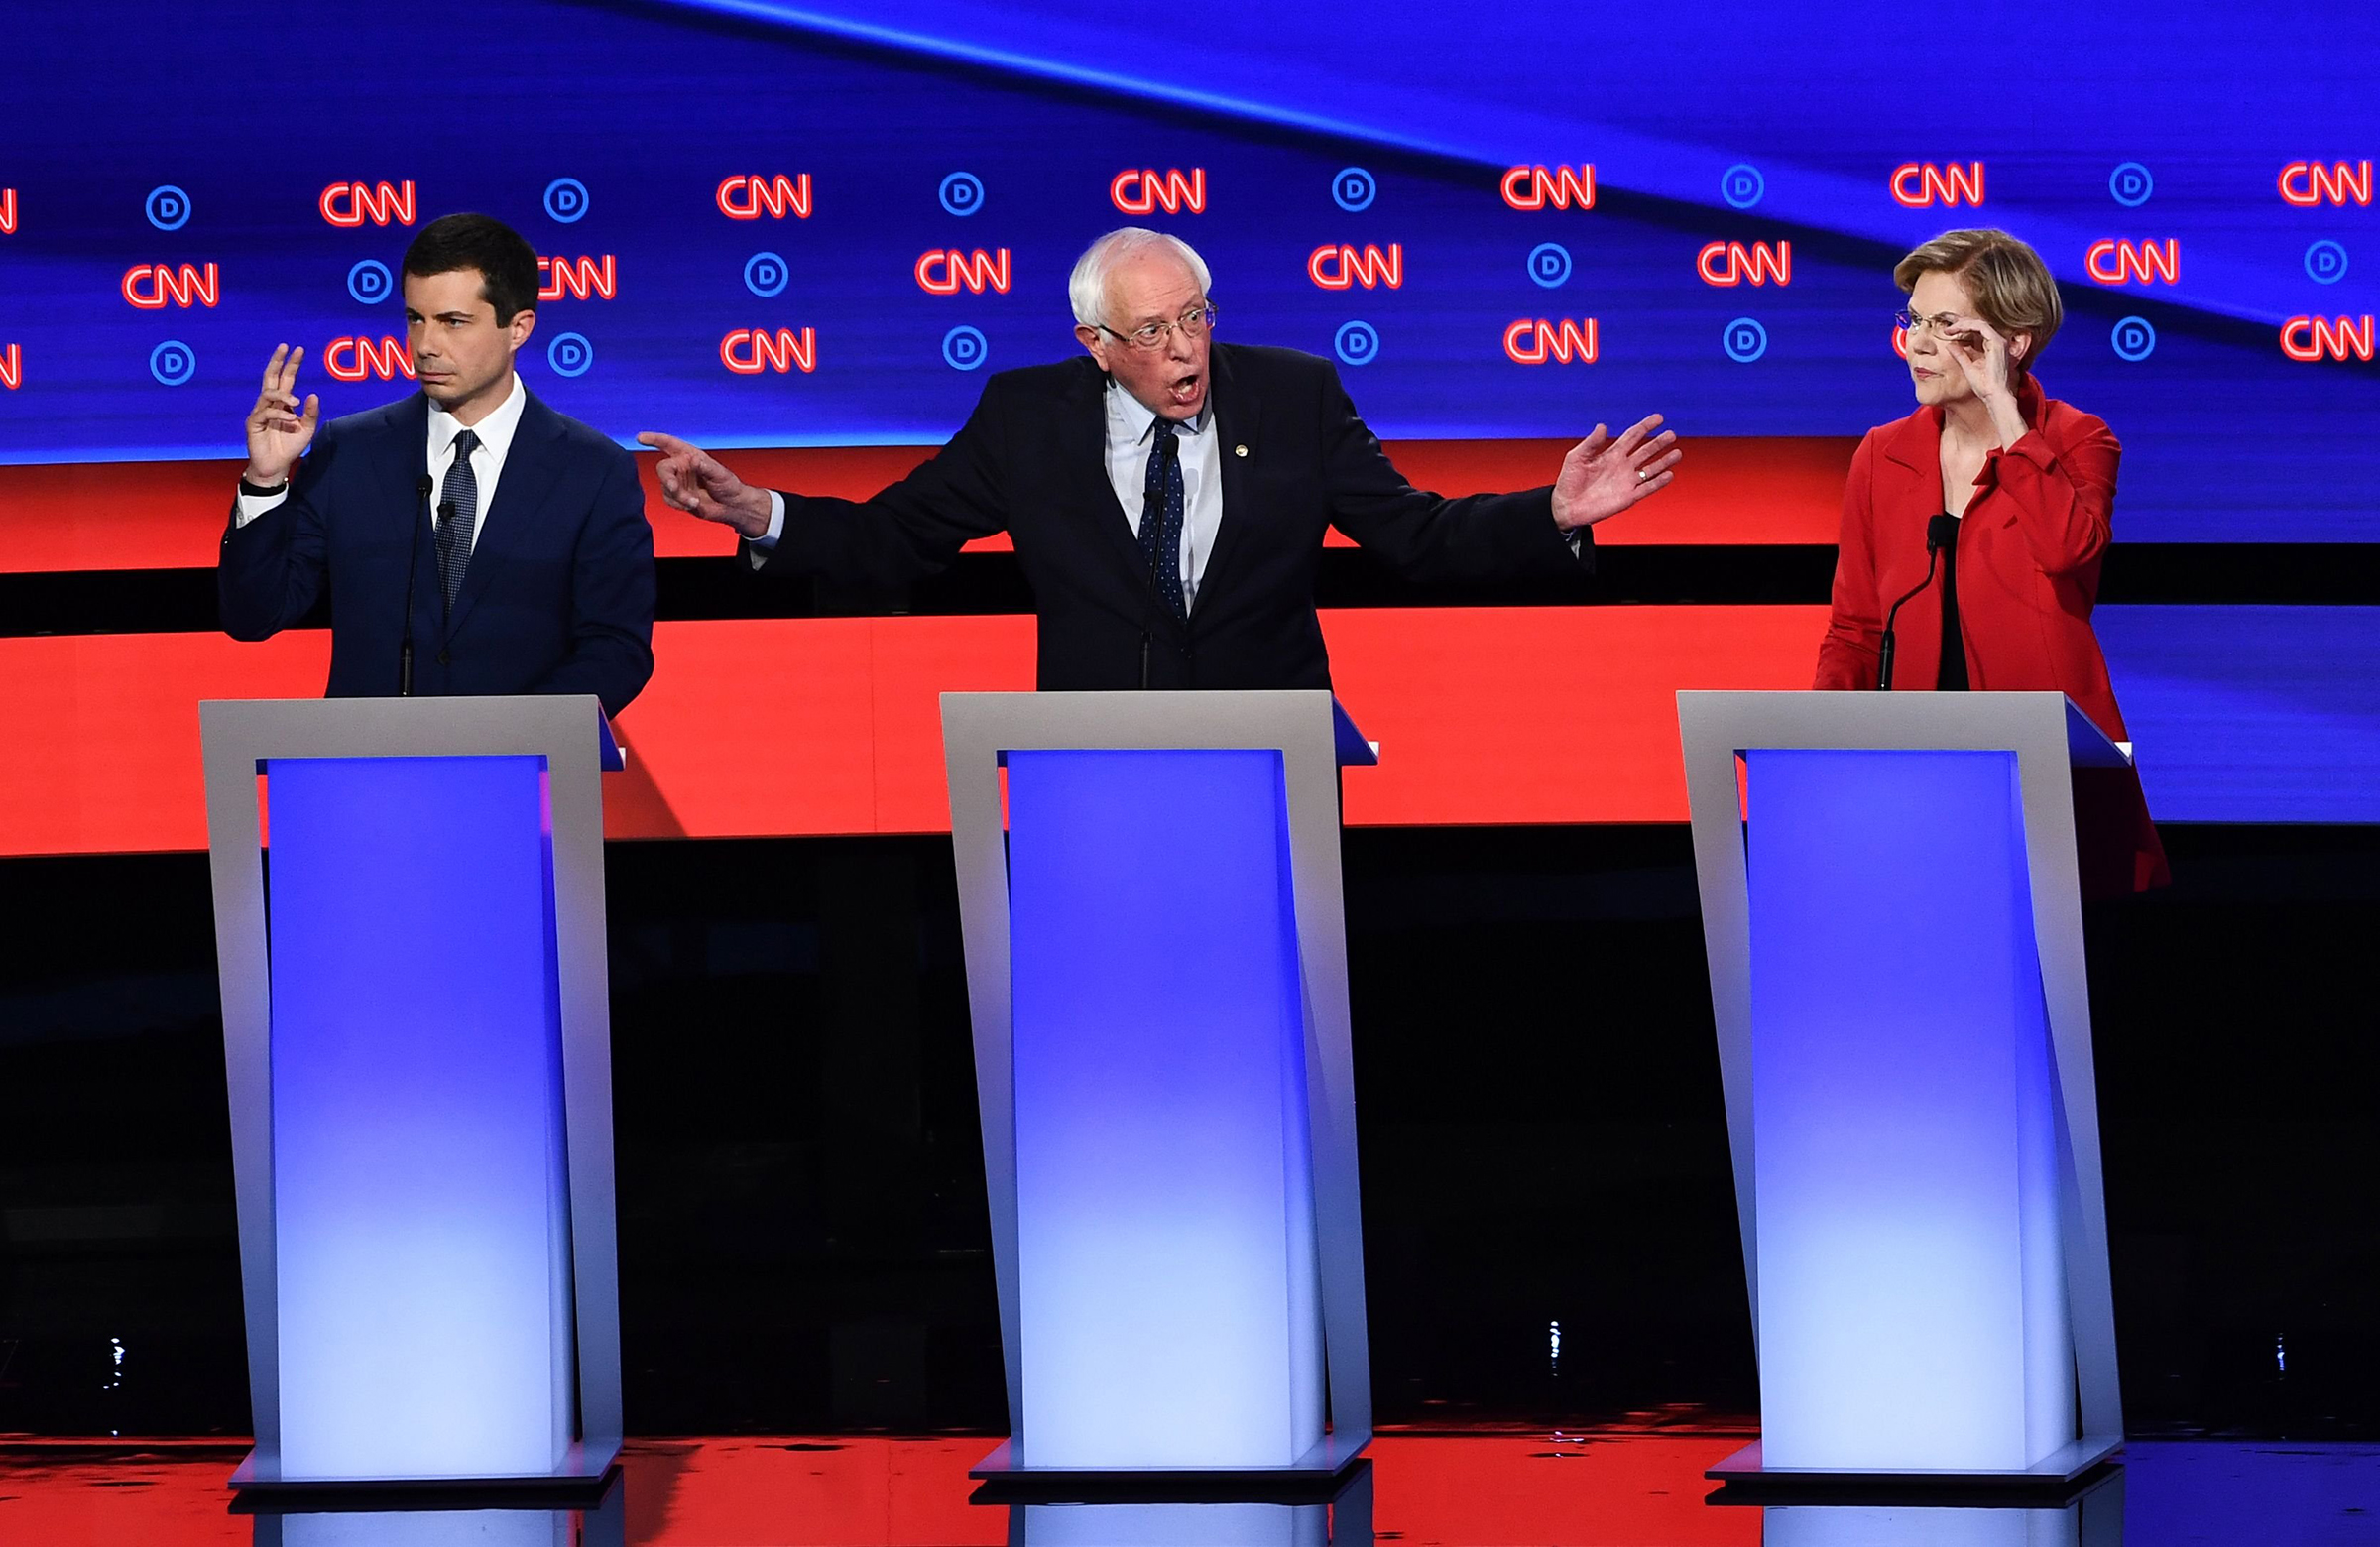 Democratic presidential hopefuls (L-R) Mayor of South Bend, Indiana, Pete Buttigieg, US senator from Vermont Bernie Sanders and US Senator from Massachusetts Elizabeth Warren participate in the first round of the second Democratic primary debate of the 2020 presidential campaign season hosted by CNN at the Fox Theatre in Detroit, Michigan on July 30, 2019. (Brendan Smialowski—AFP/Getty Images)